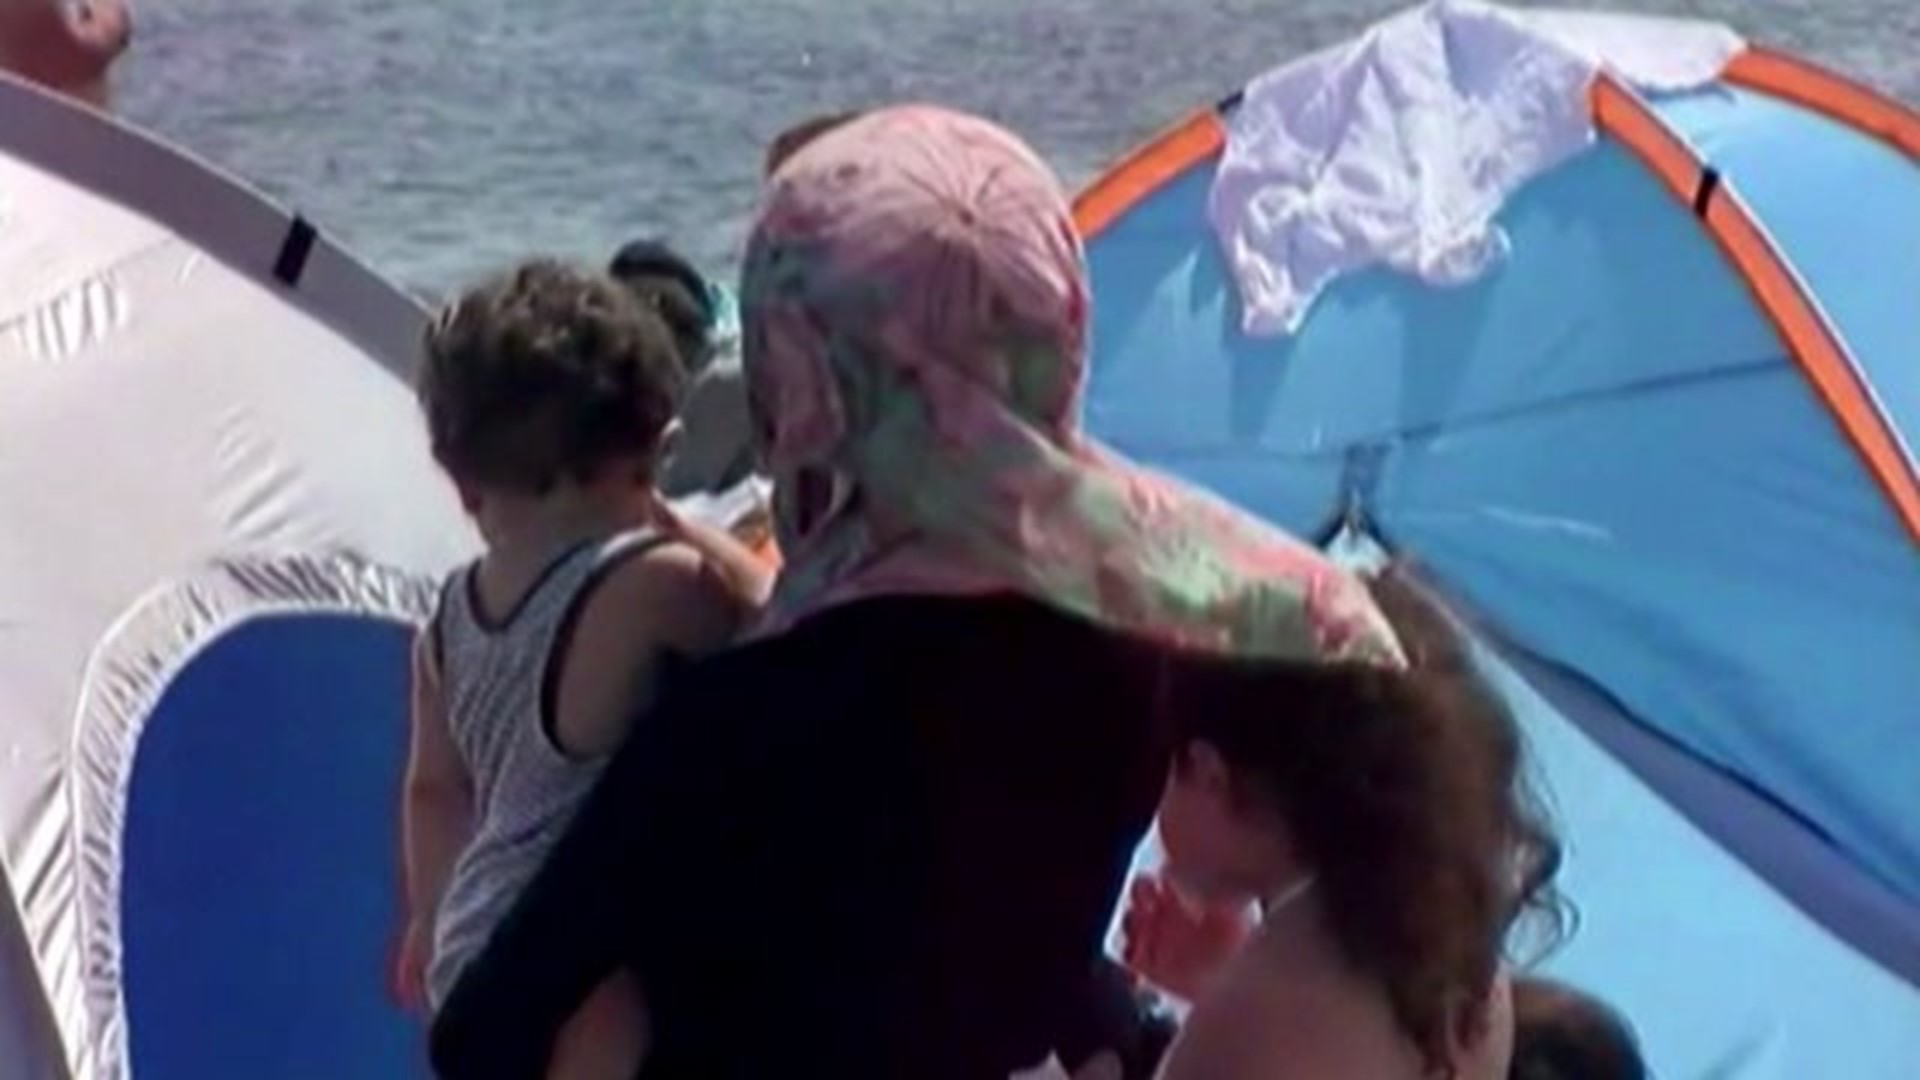 Moline agency awaits word on aiding Syrian refugees